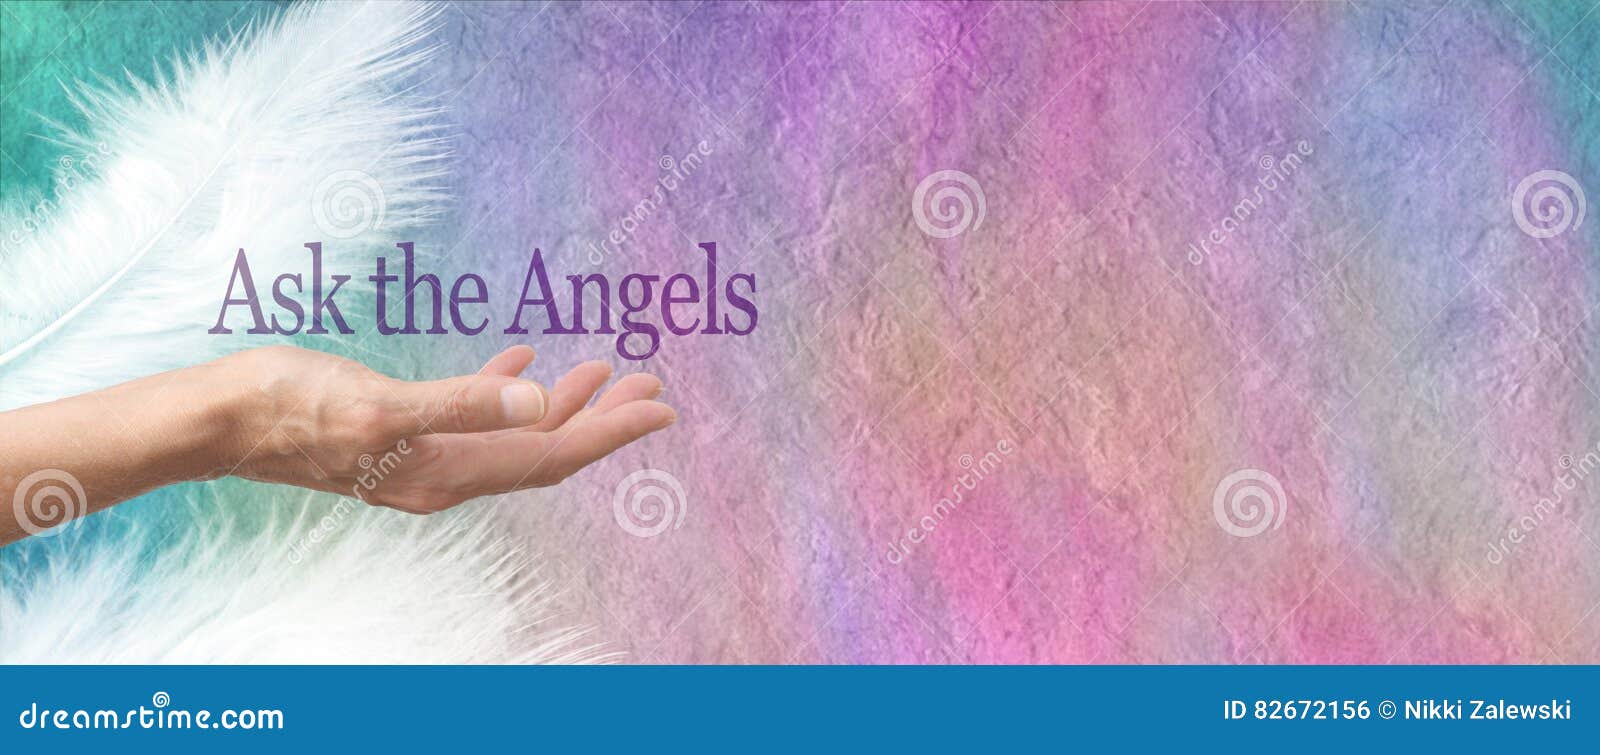 ask your angels parchment banner